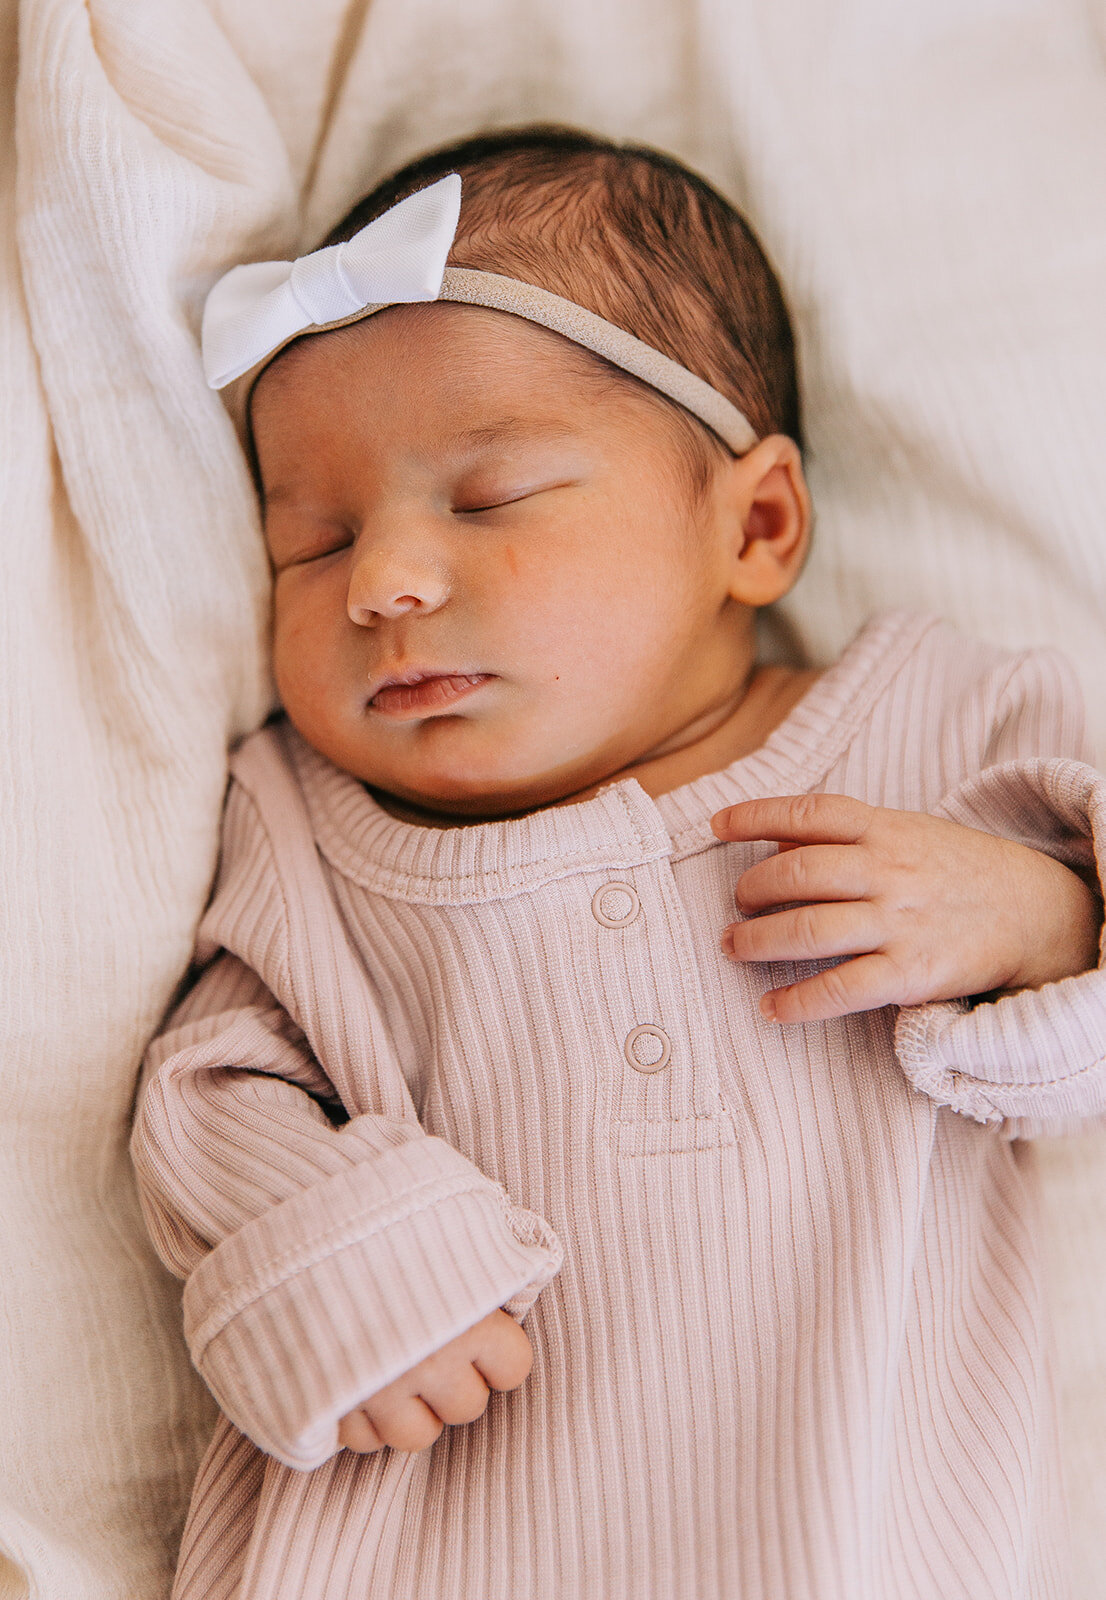  newborn baby girl in pink dress cream sheets white headband bow on her forehead sleeping baby during newborn session professional newborn photographer in logan utah blush door studio photography affordable studio session with bella alder photography